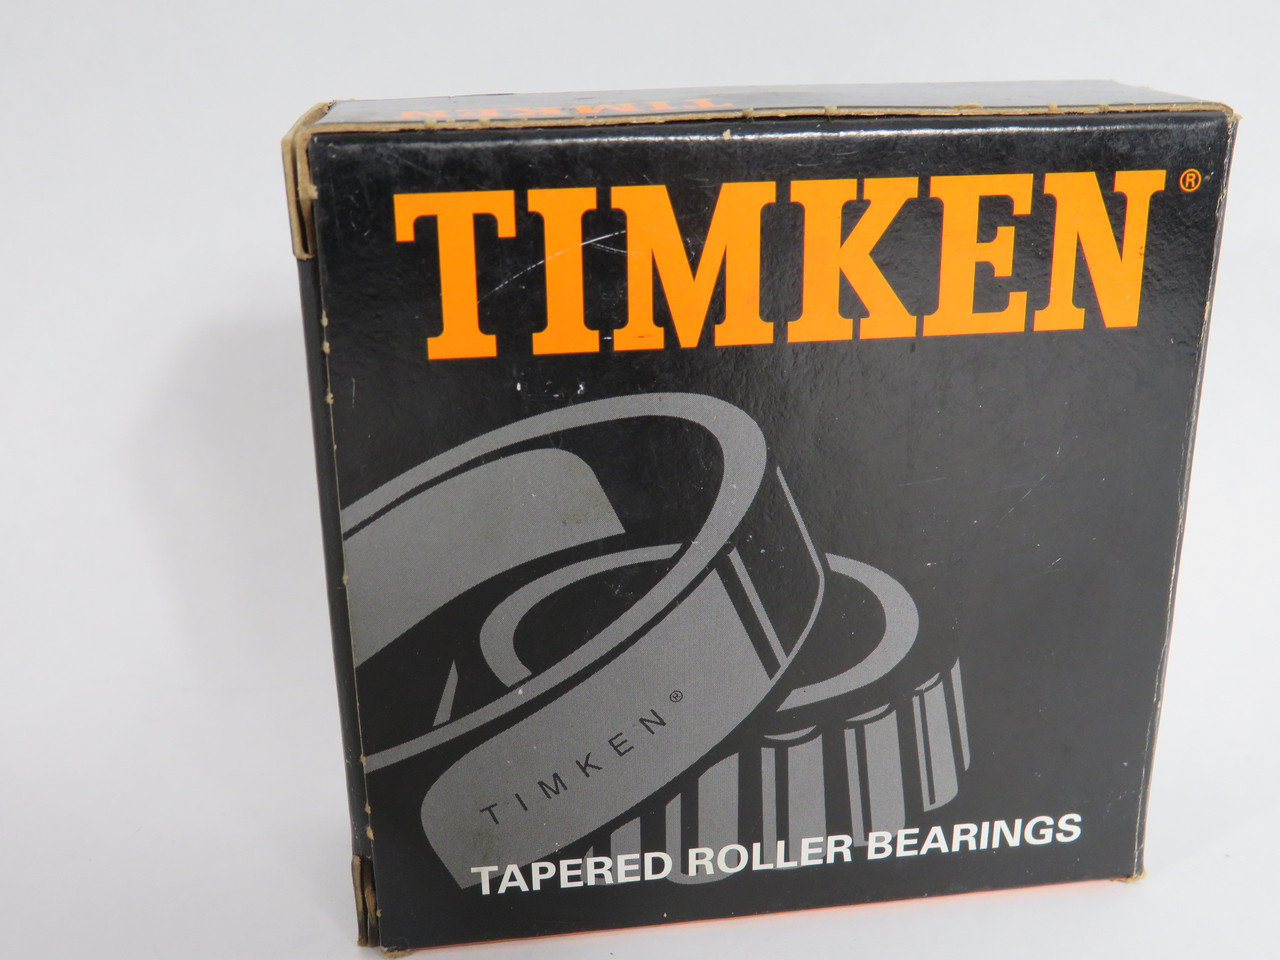 Timken 33821 Tapered Roller Bearing Cup 3.75"OD 0.875"W NEW